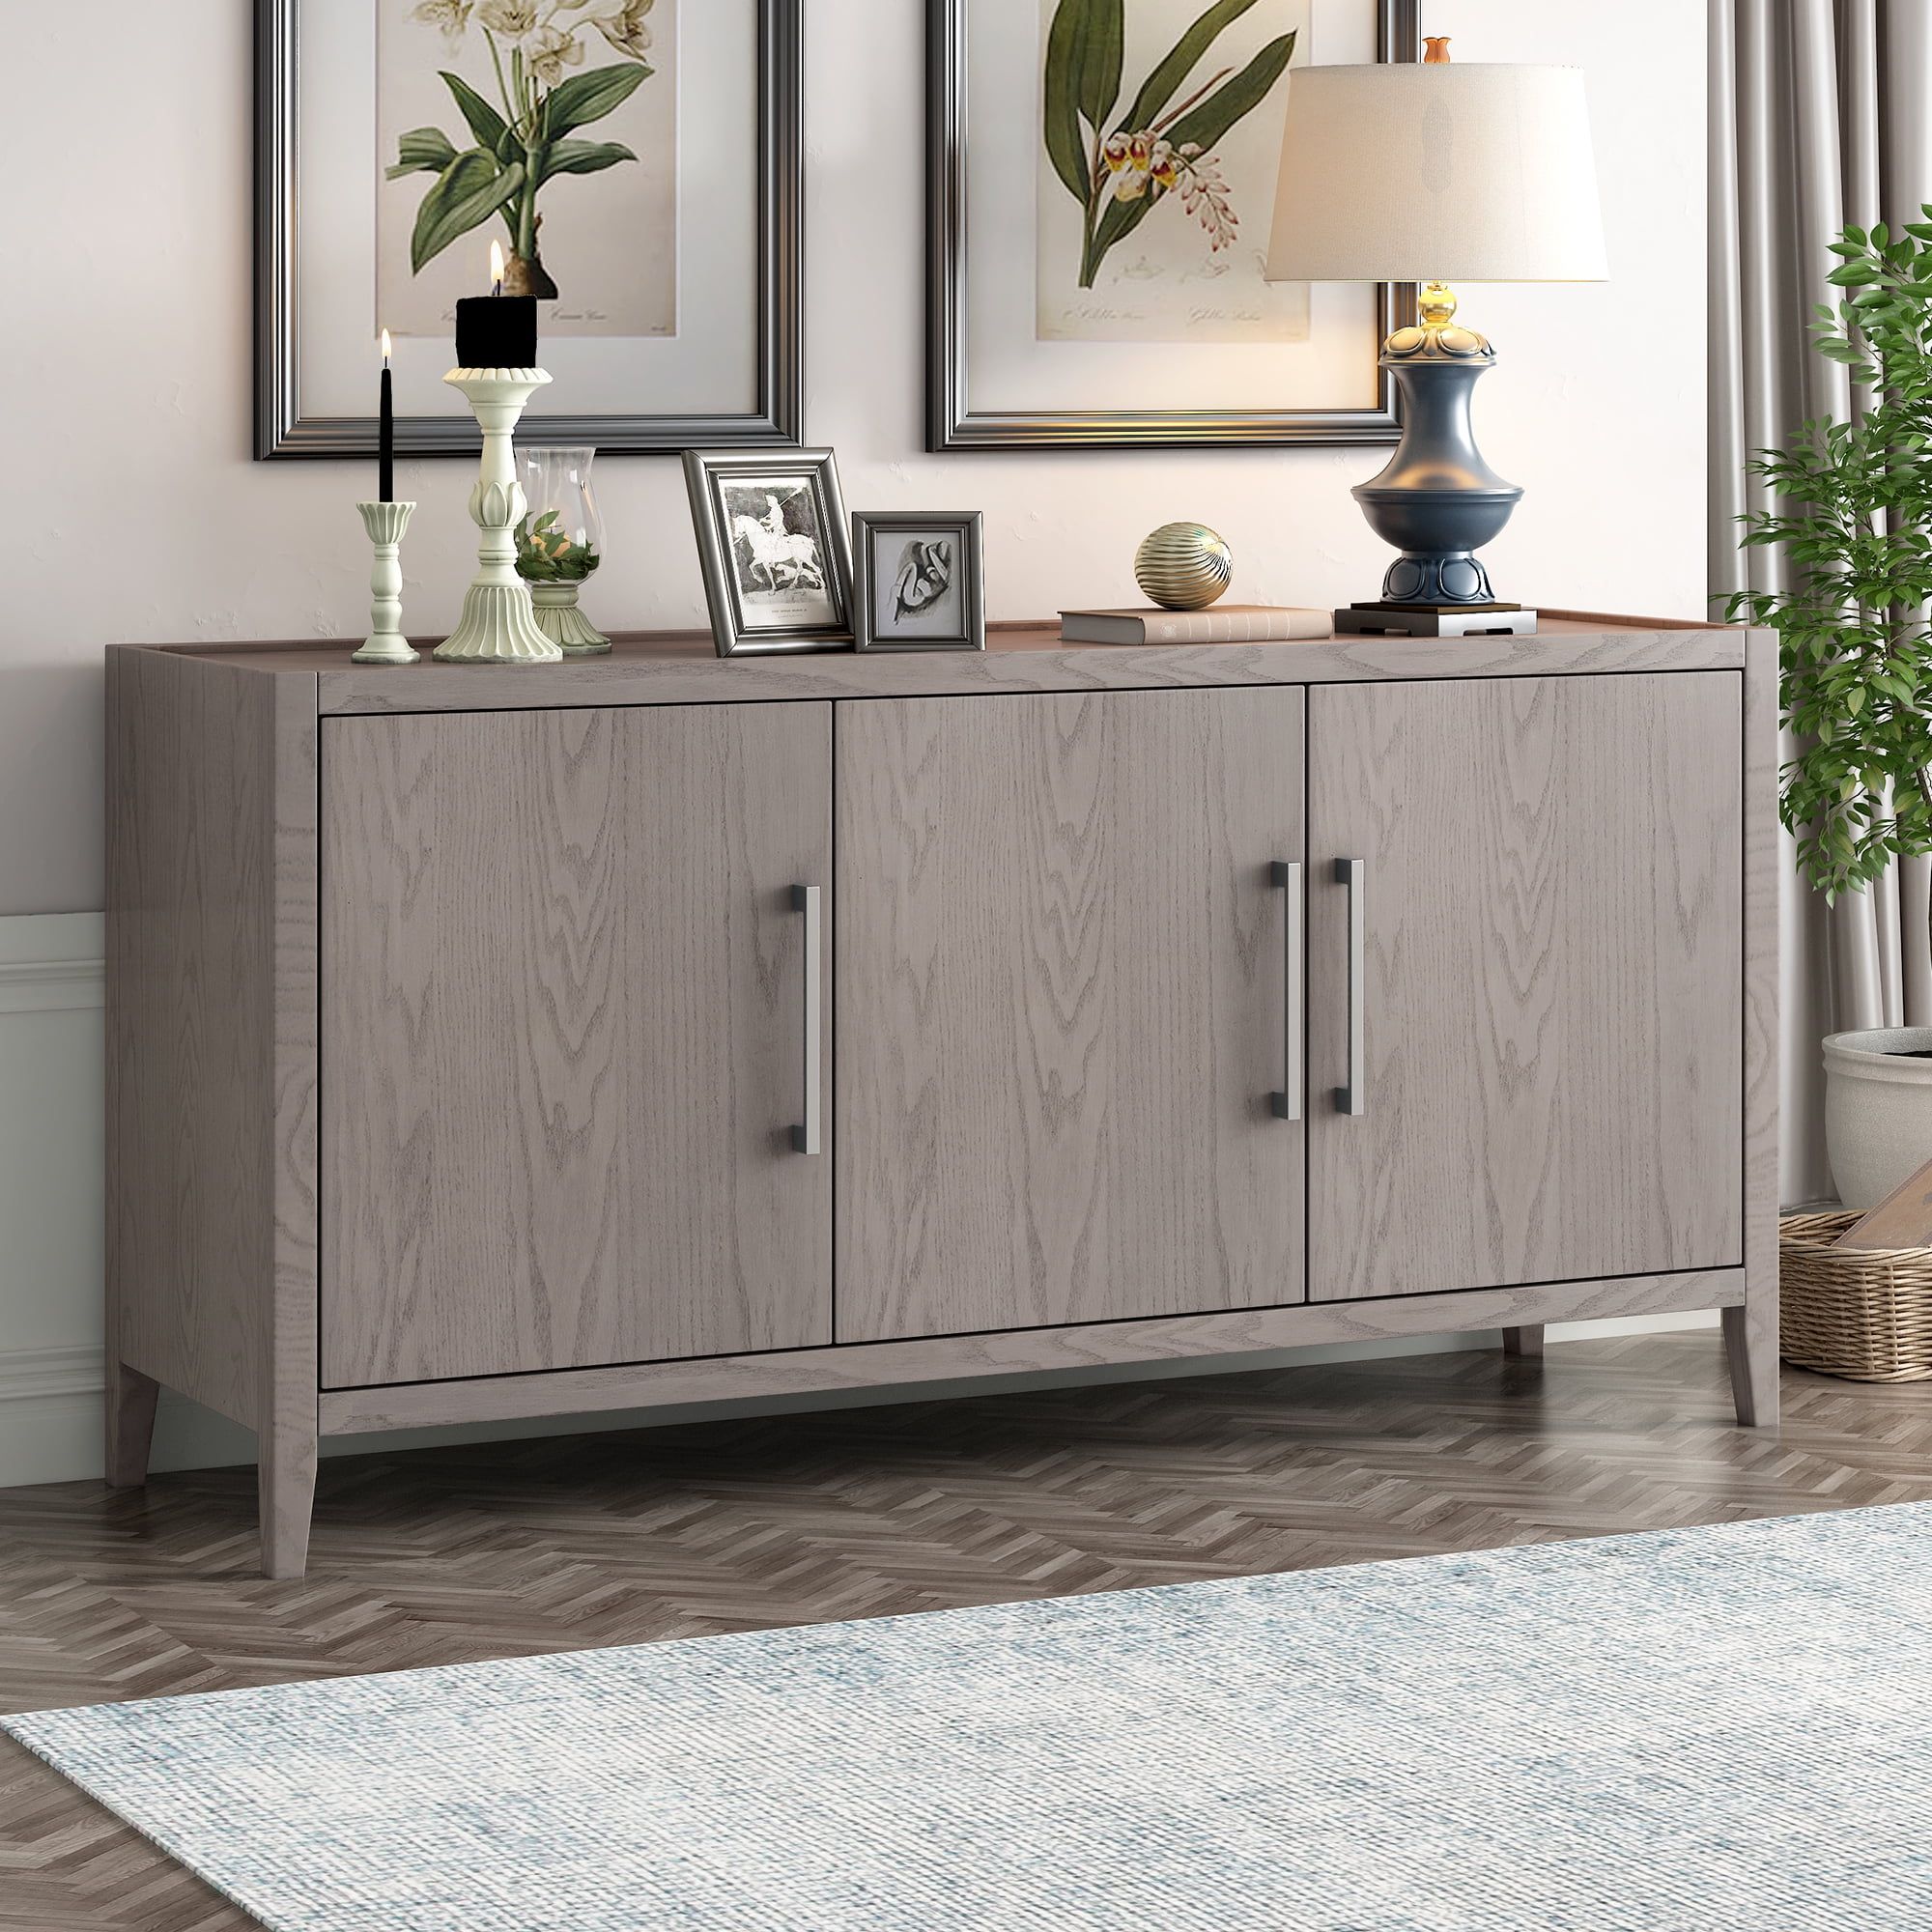 Beige Storage Cabinet, Sideboard Cabinet Furniture, Accent Storage Cabinet  With 3 Doors And Adjustable Shelves, Retro Wood Buffet Sideboard, Kamida Storage  Cabinet For Kitchen Dining Room Living Room – Walmart Within 3 Door Accent Cabinet Sideboards (Photo 4 of 15)